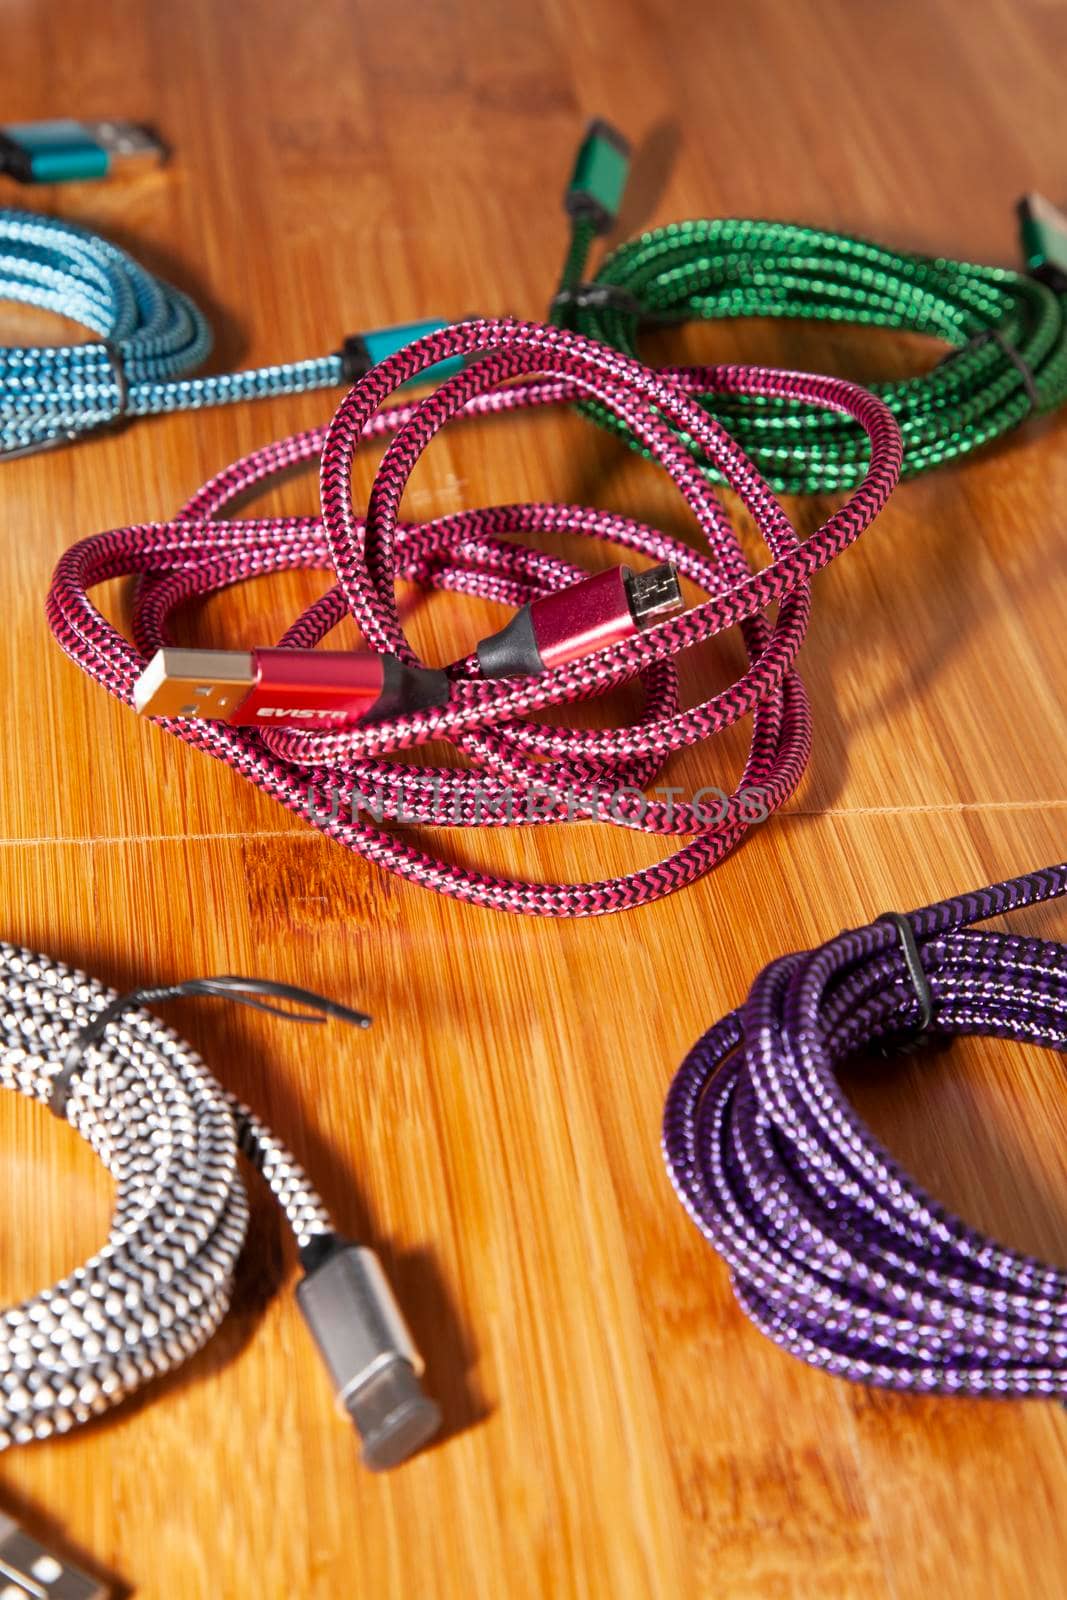 Pink charging cord in the middle of green, blue, purple, and silver charging cords on a wooden table